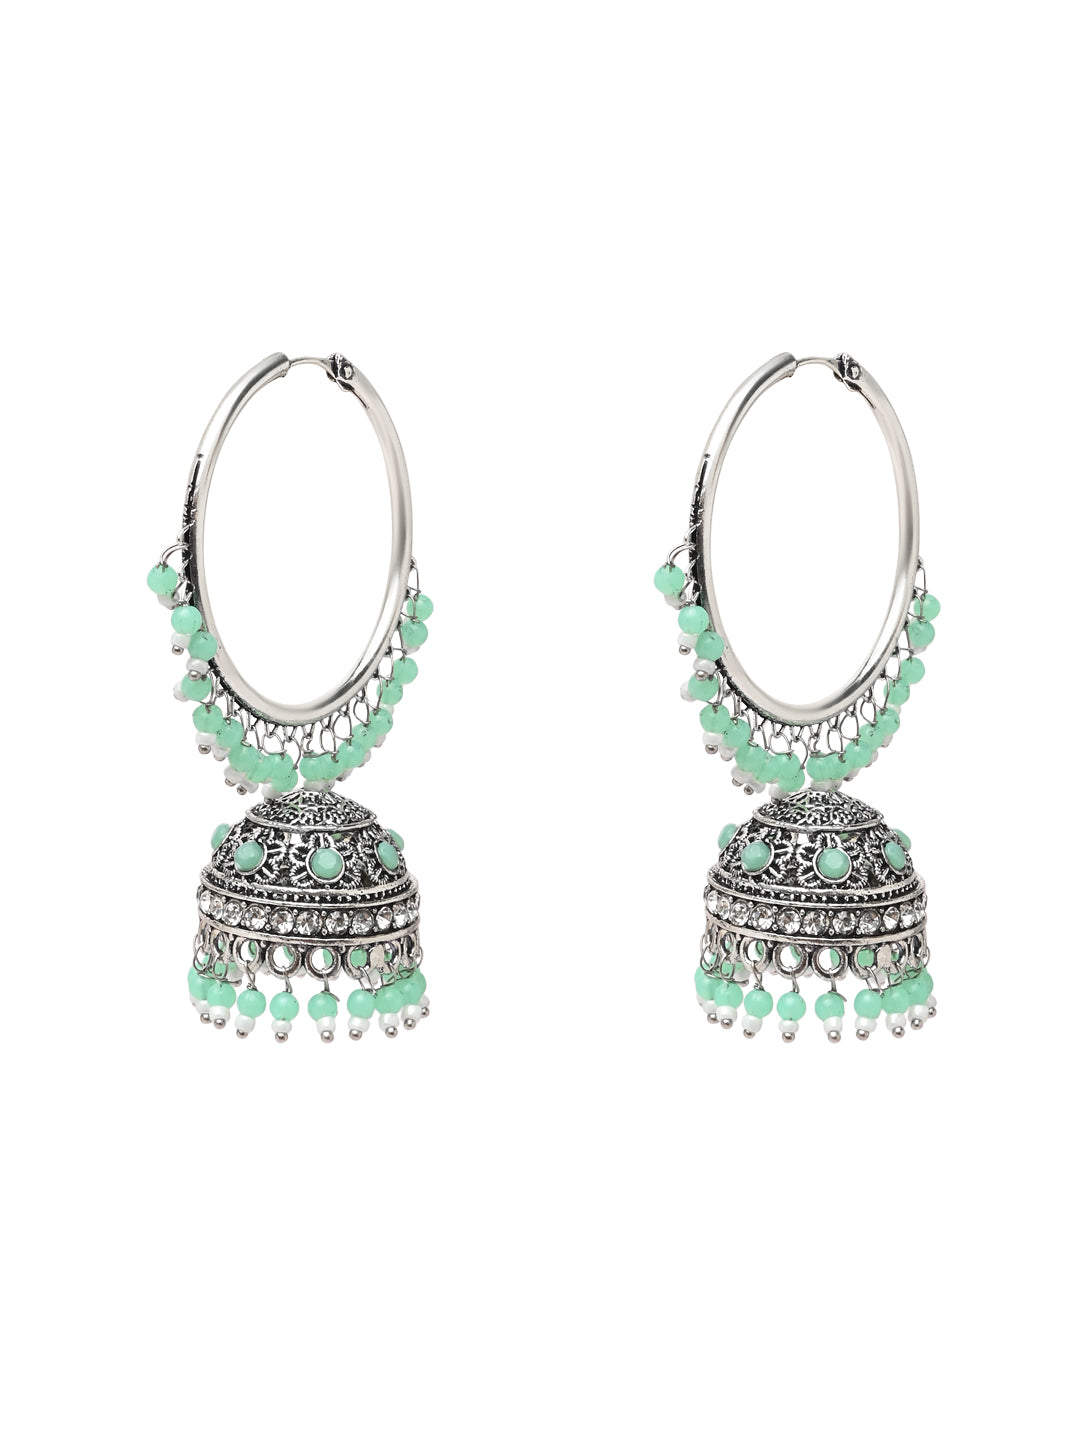 Women's Silver Plated Traditional Handcrafted Mint Pearl Jhumki Earrings (E3060Zmin) - I Jewels